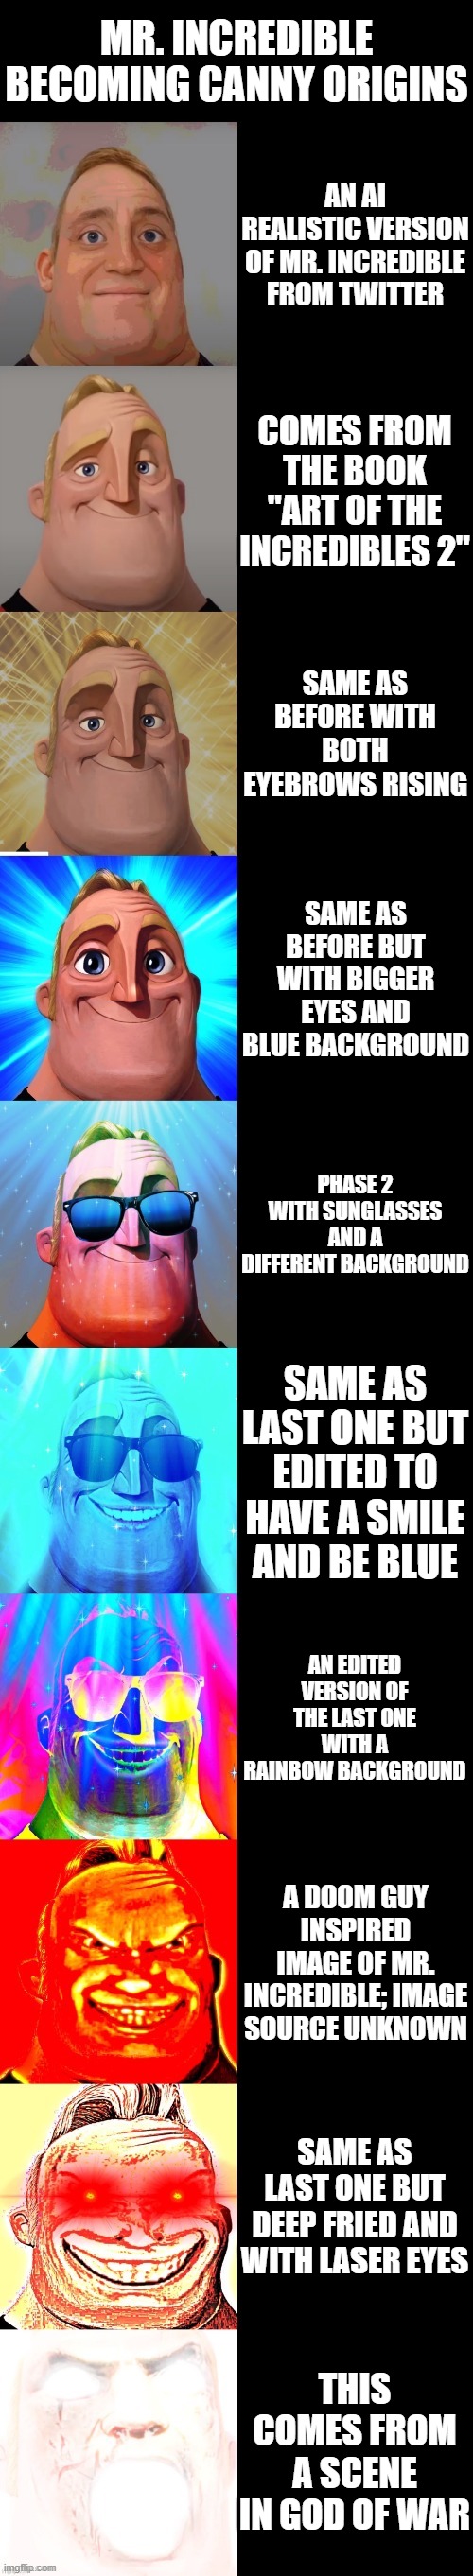 Mr Incredible Becoming Uncanny but with 39 Phases Meme Generator